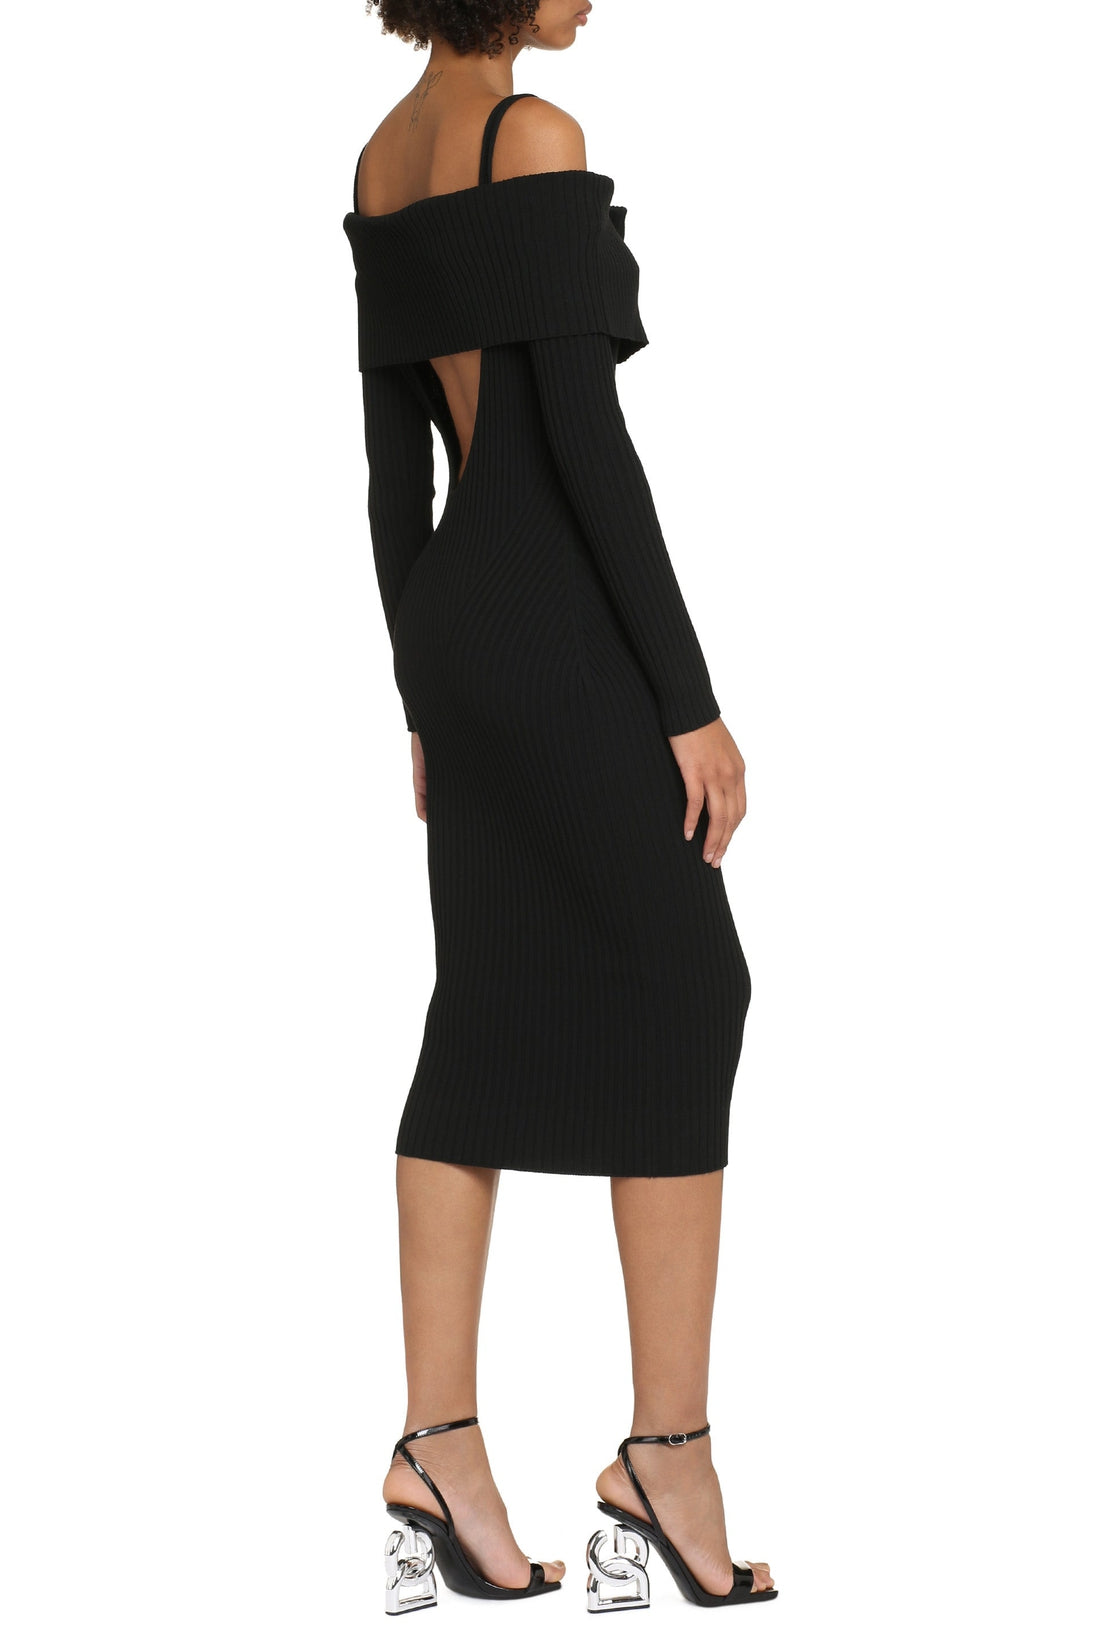 ANDREADAMO-OUTLET-SALE-Ribbed knit midi dress-ARCHIVIST